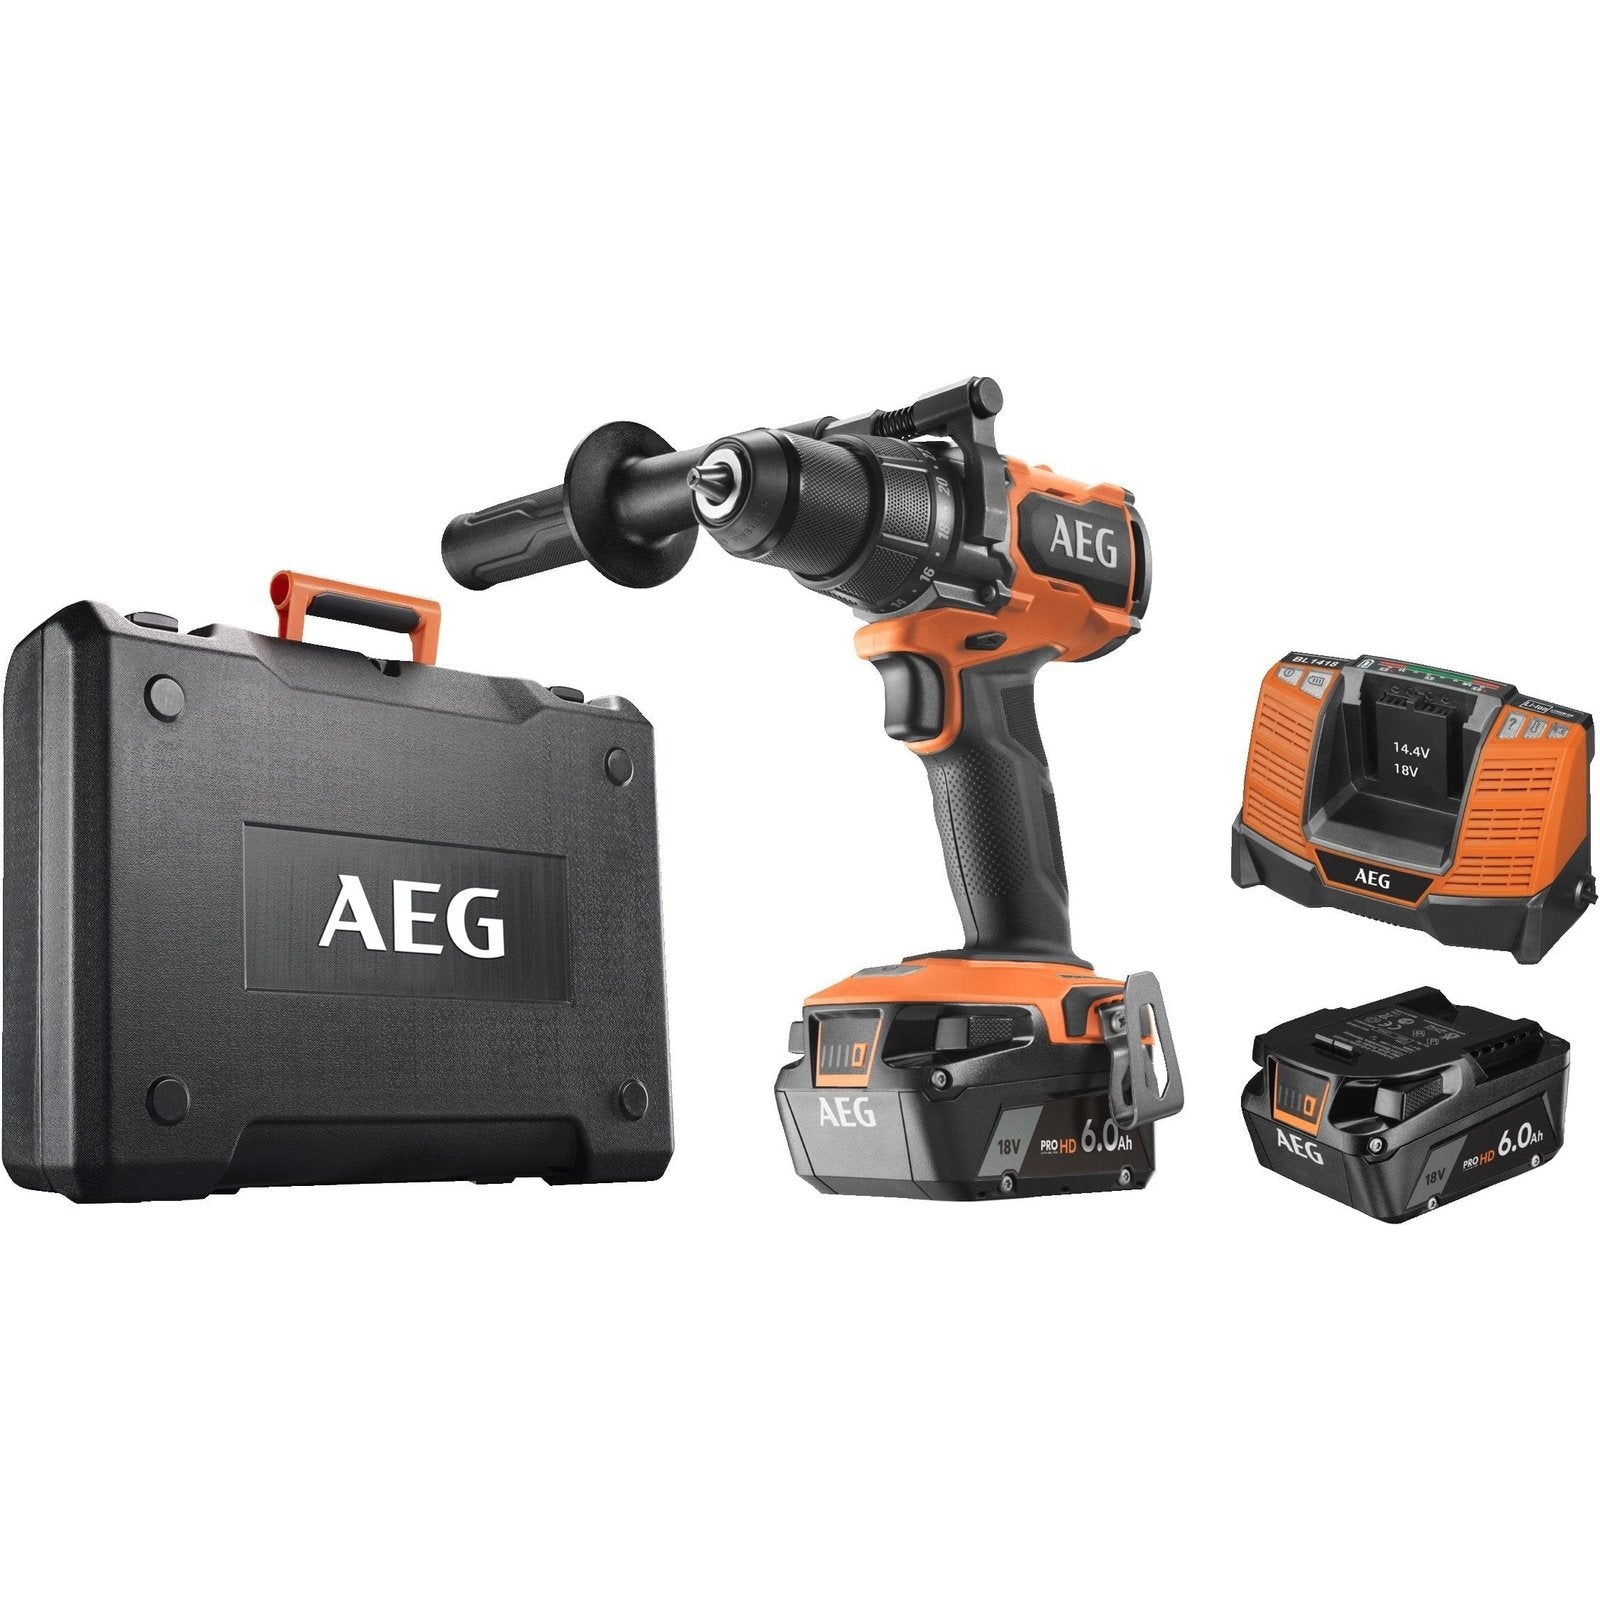 AEG Lithium-Ion Cordless Impact Hammer Drill 18V - BSB18CLI-202C | Supply Master Accra, Ghana Drill Buy Tools hardware Building materials